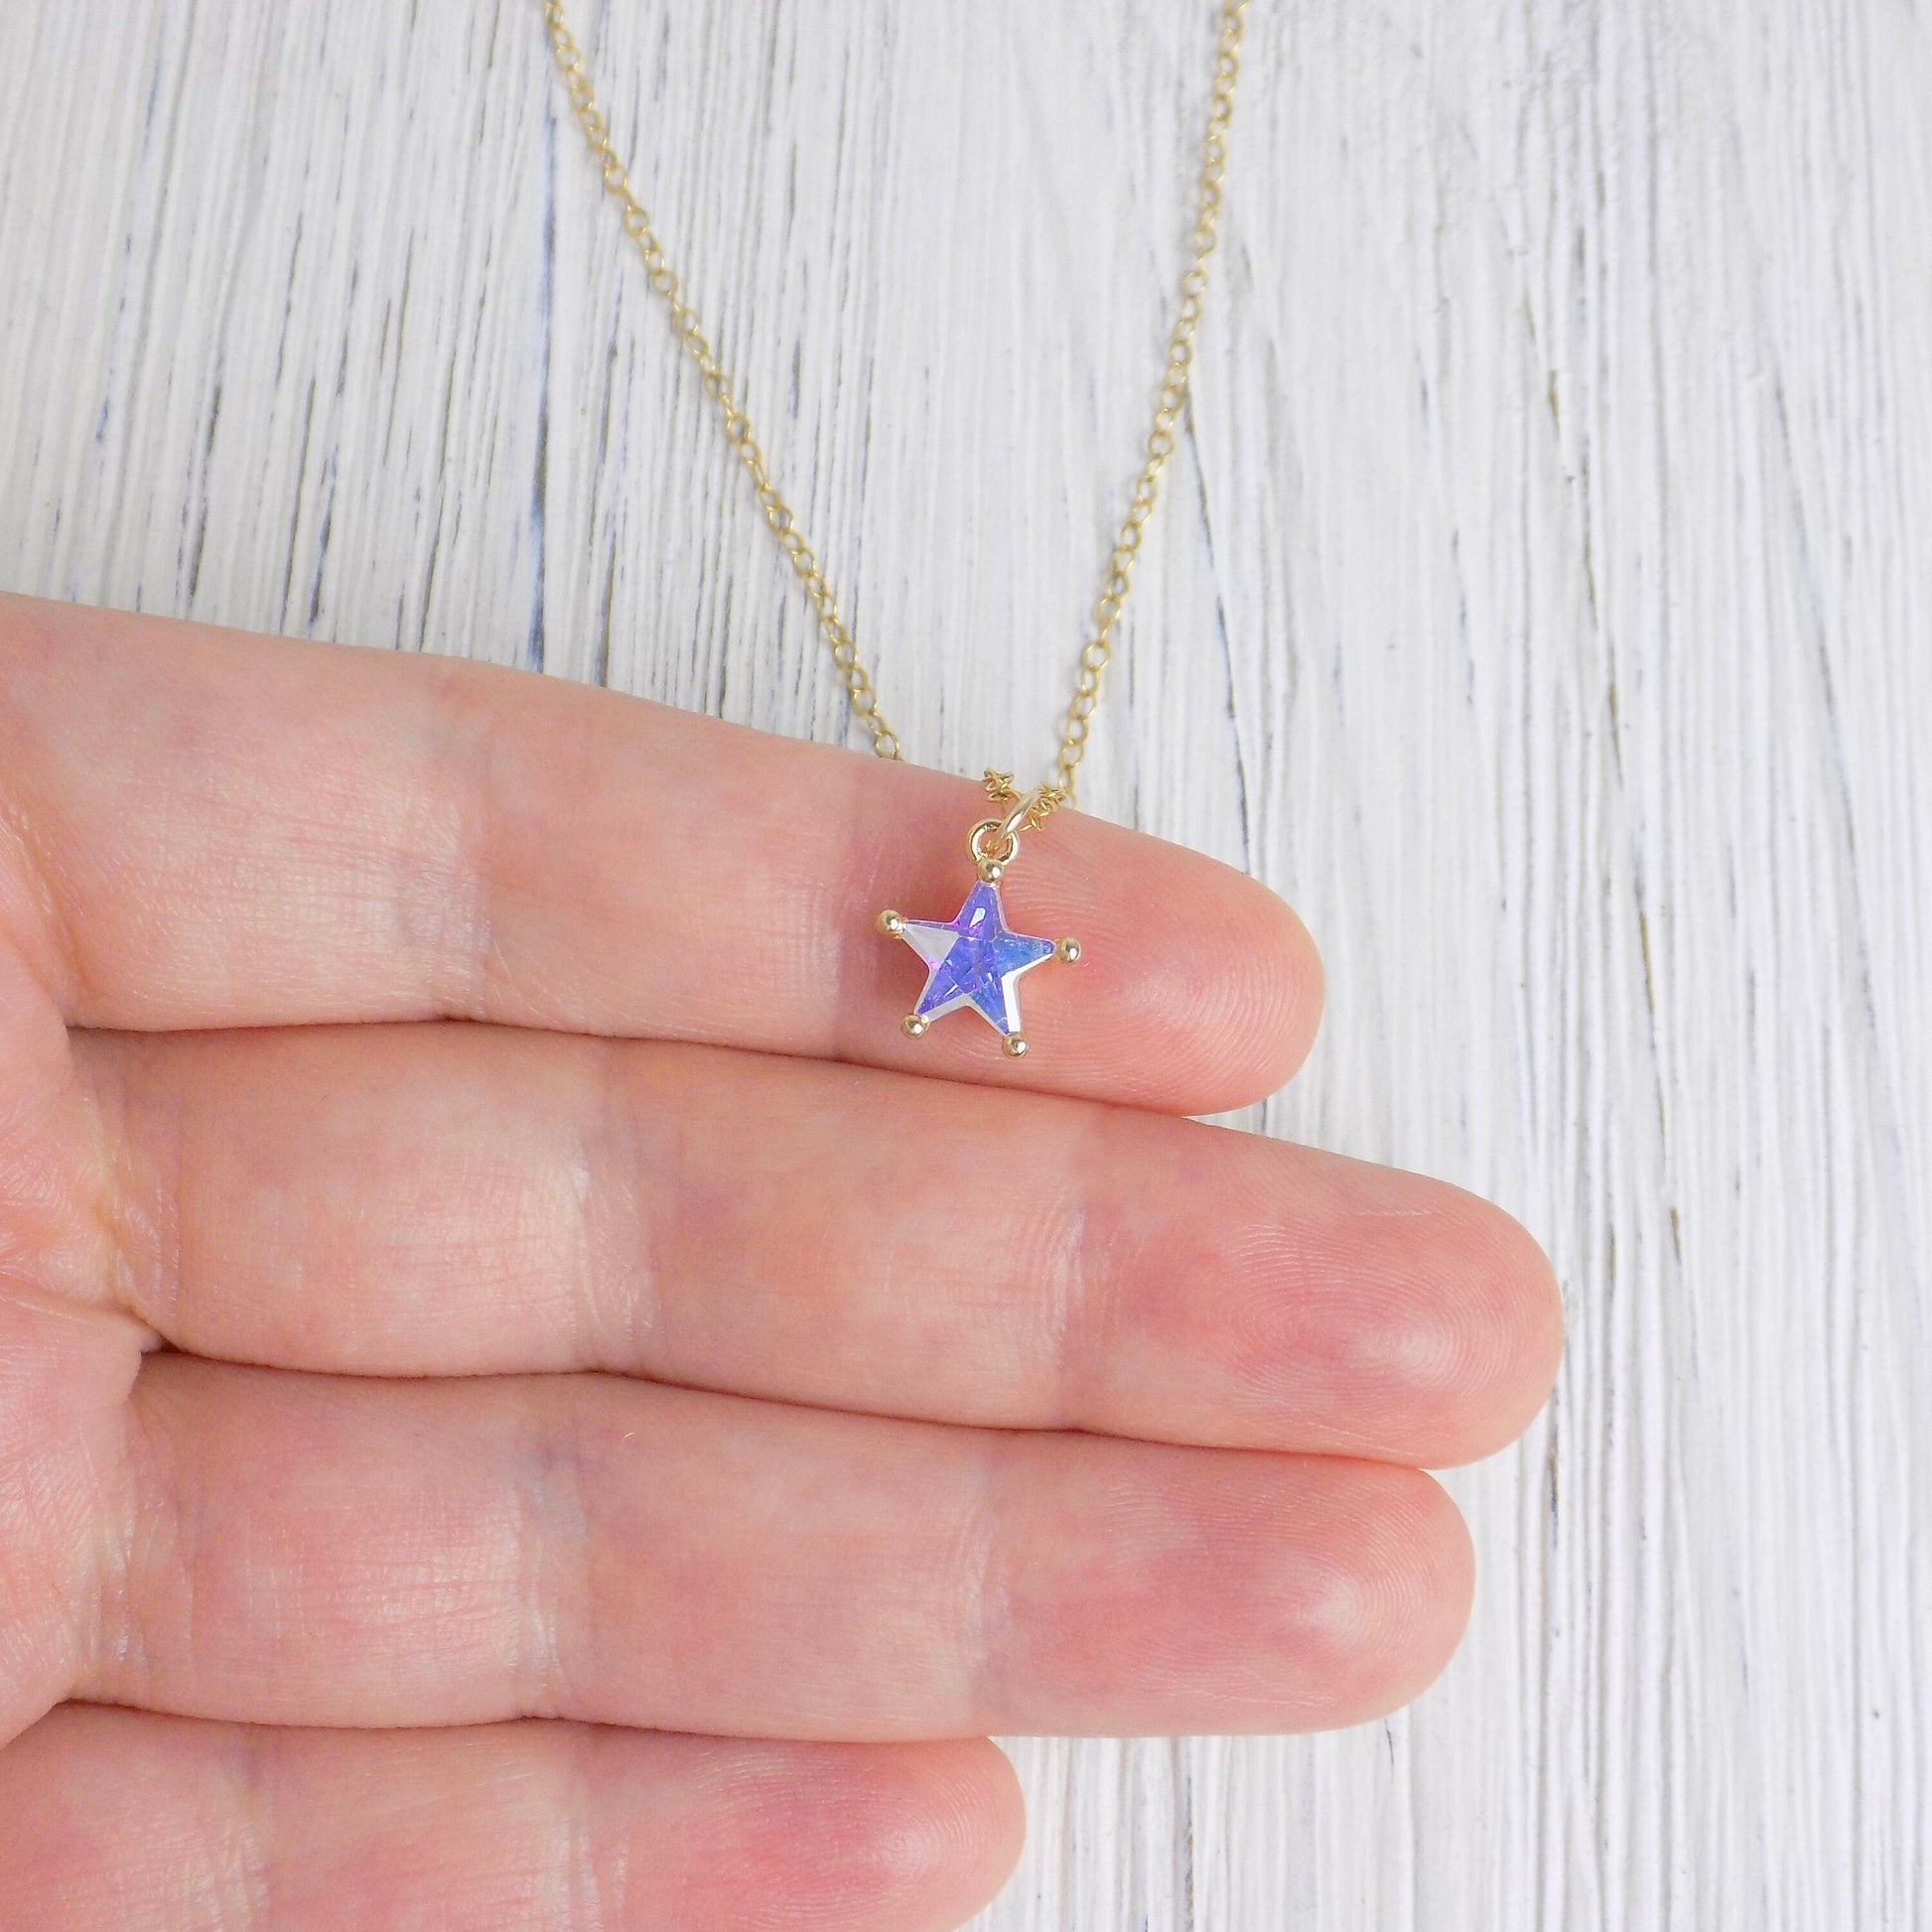 Valentines Day Gift, Tiny Star Necklace, Purple Aura Quartz Charm Necklace For Layering, 14K Gold Filled Chain, M6-27